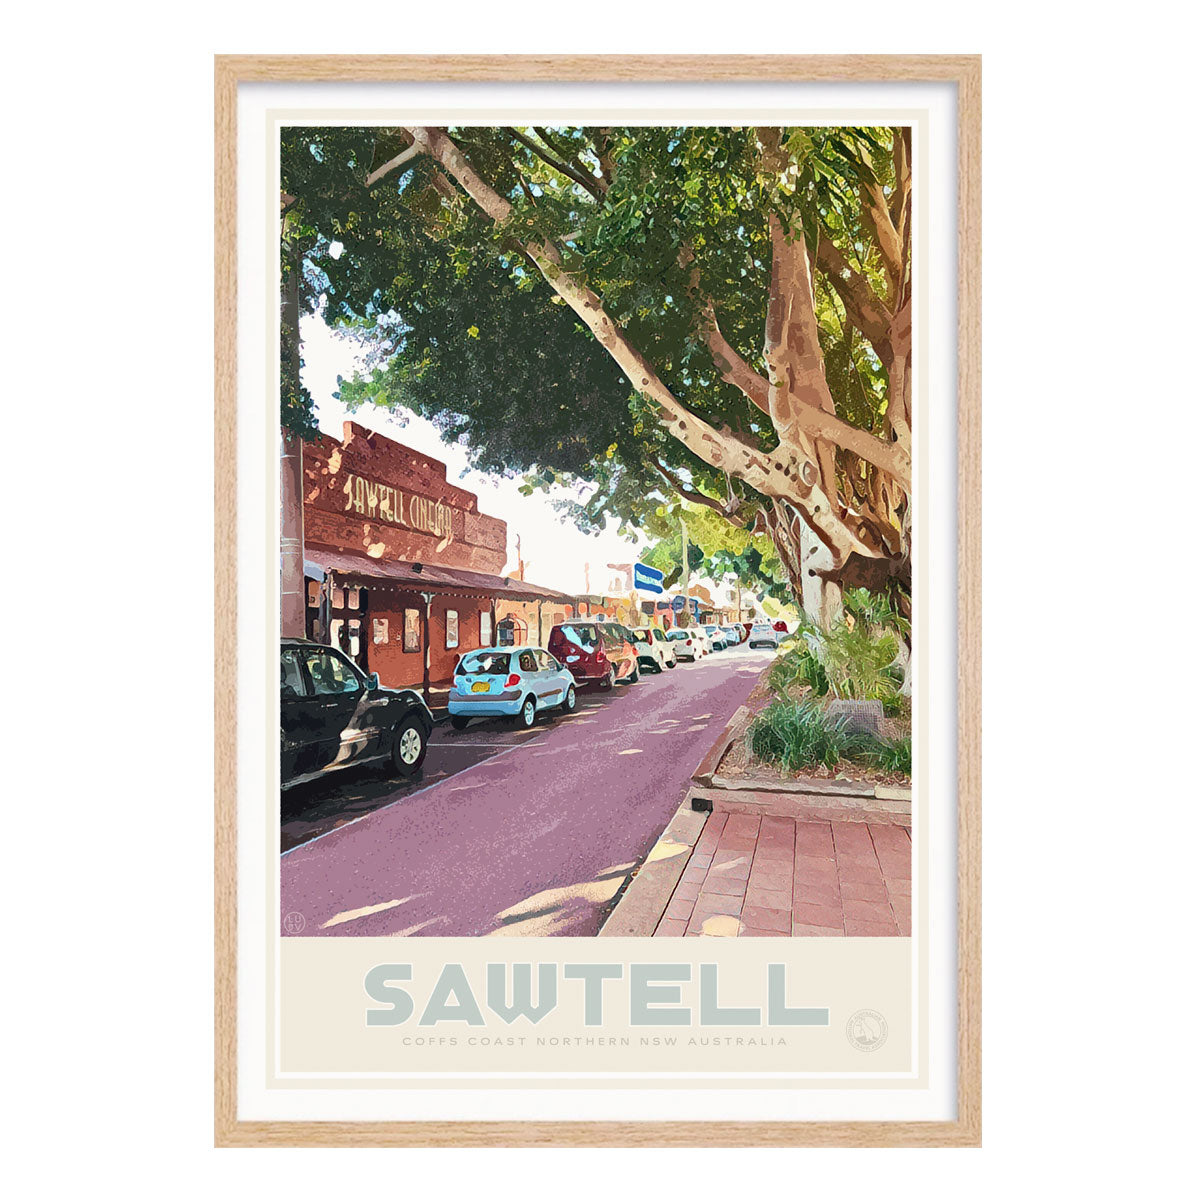 Sawtell retro vintage travel poster print in oak frame from Places We Luv